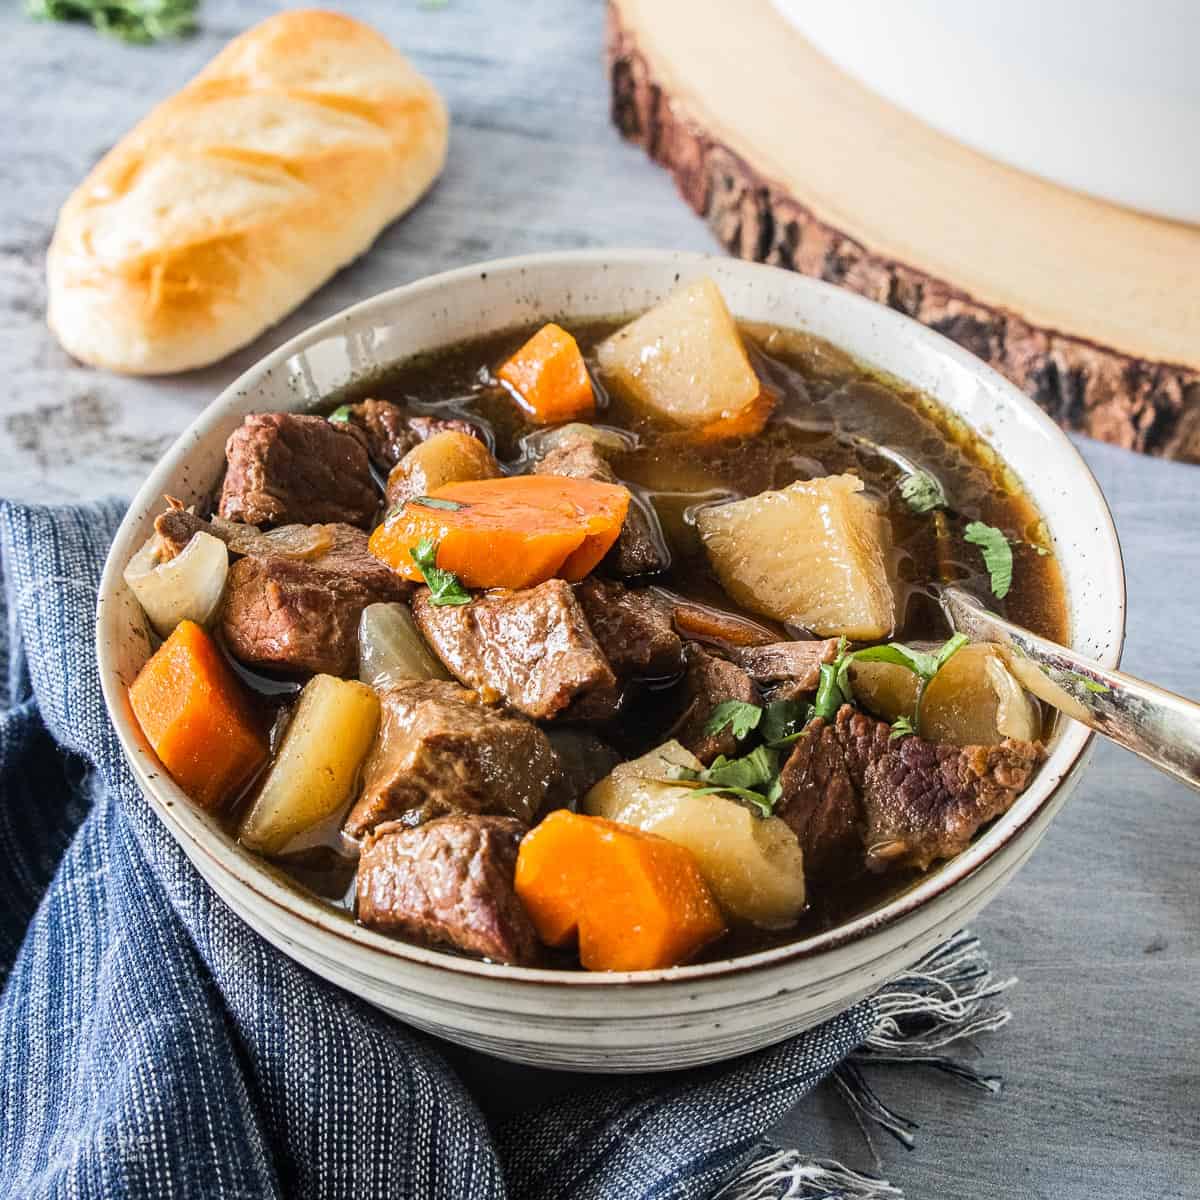 Irish stew in bowl with spoon